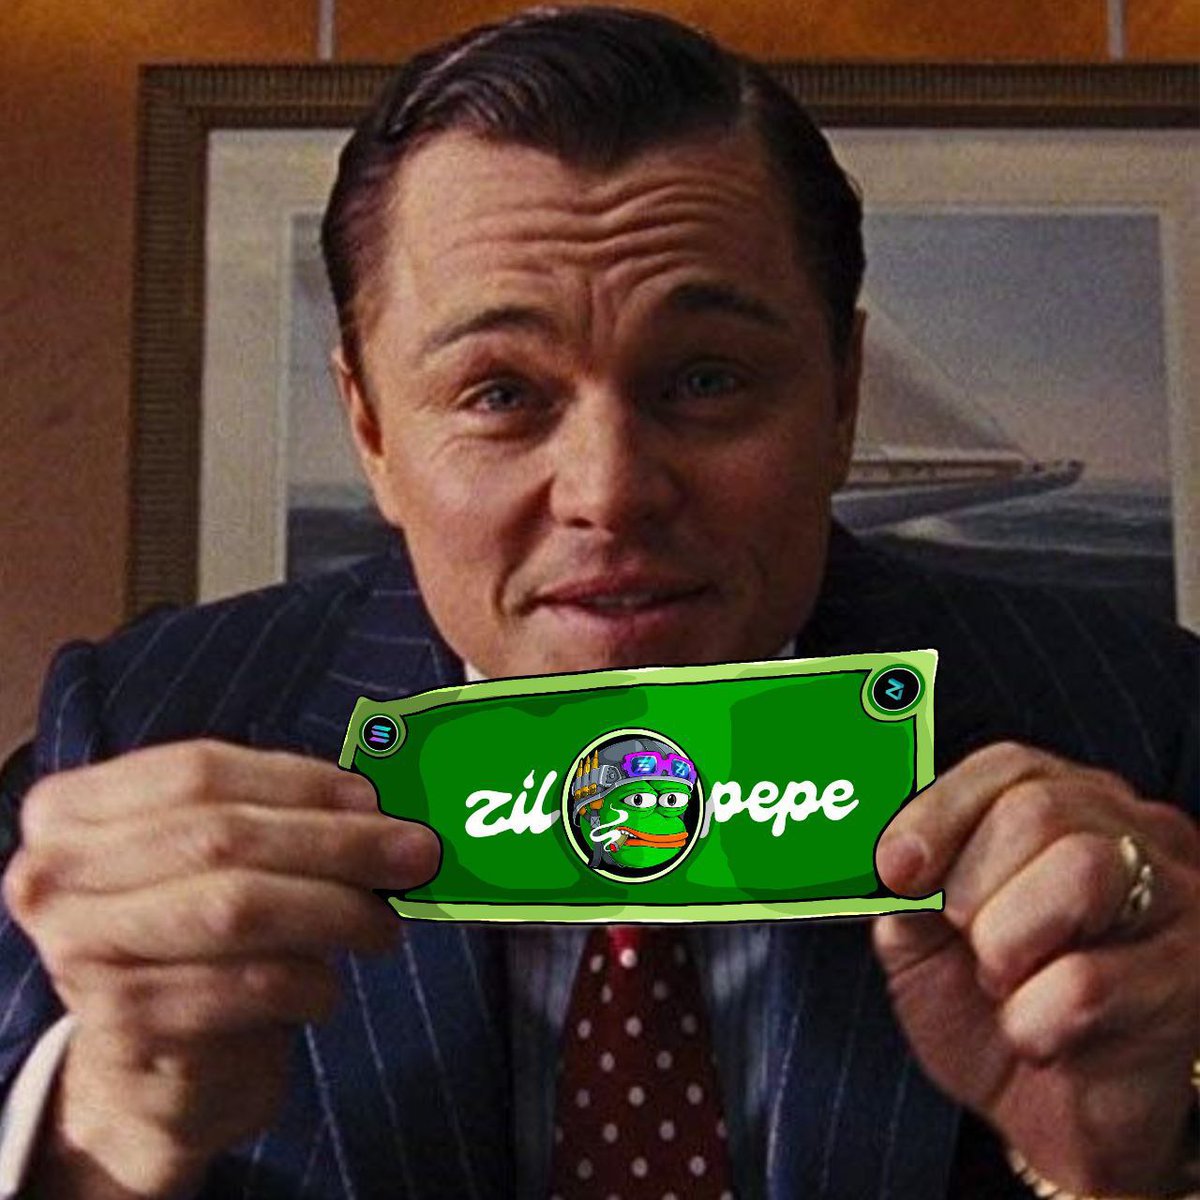 #ZilPepe 🐸 is the first and the flagship memecoin on #Zilliqa blockchain.

Zilliqa reaches ATH, imagine how many zeros ZilPepe is about to erase... 💥💯

@ZilPepeMemecoin is your ticket to freedom 🔥

#Altcoins $zil #zil #ETH $ETH